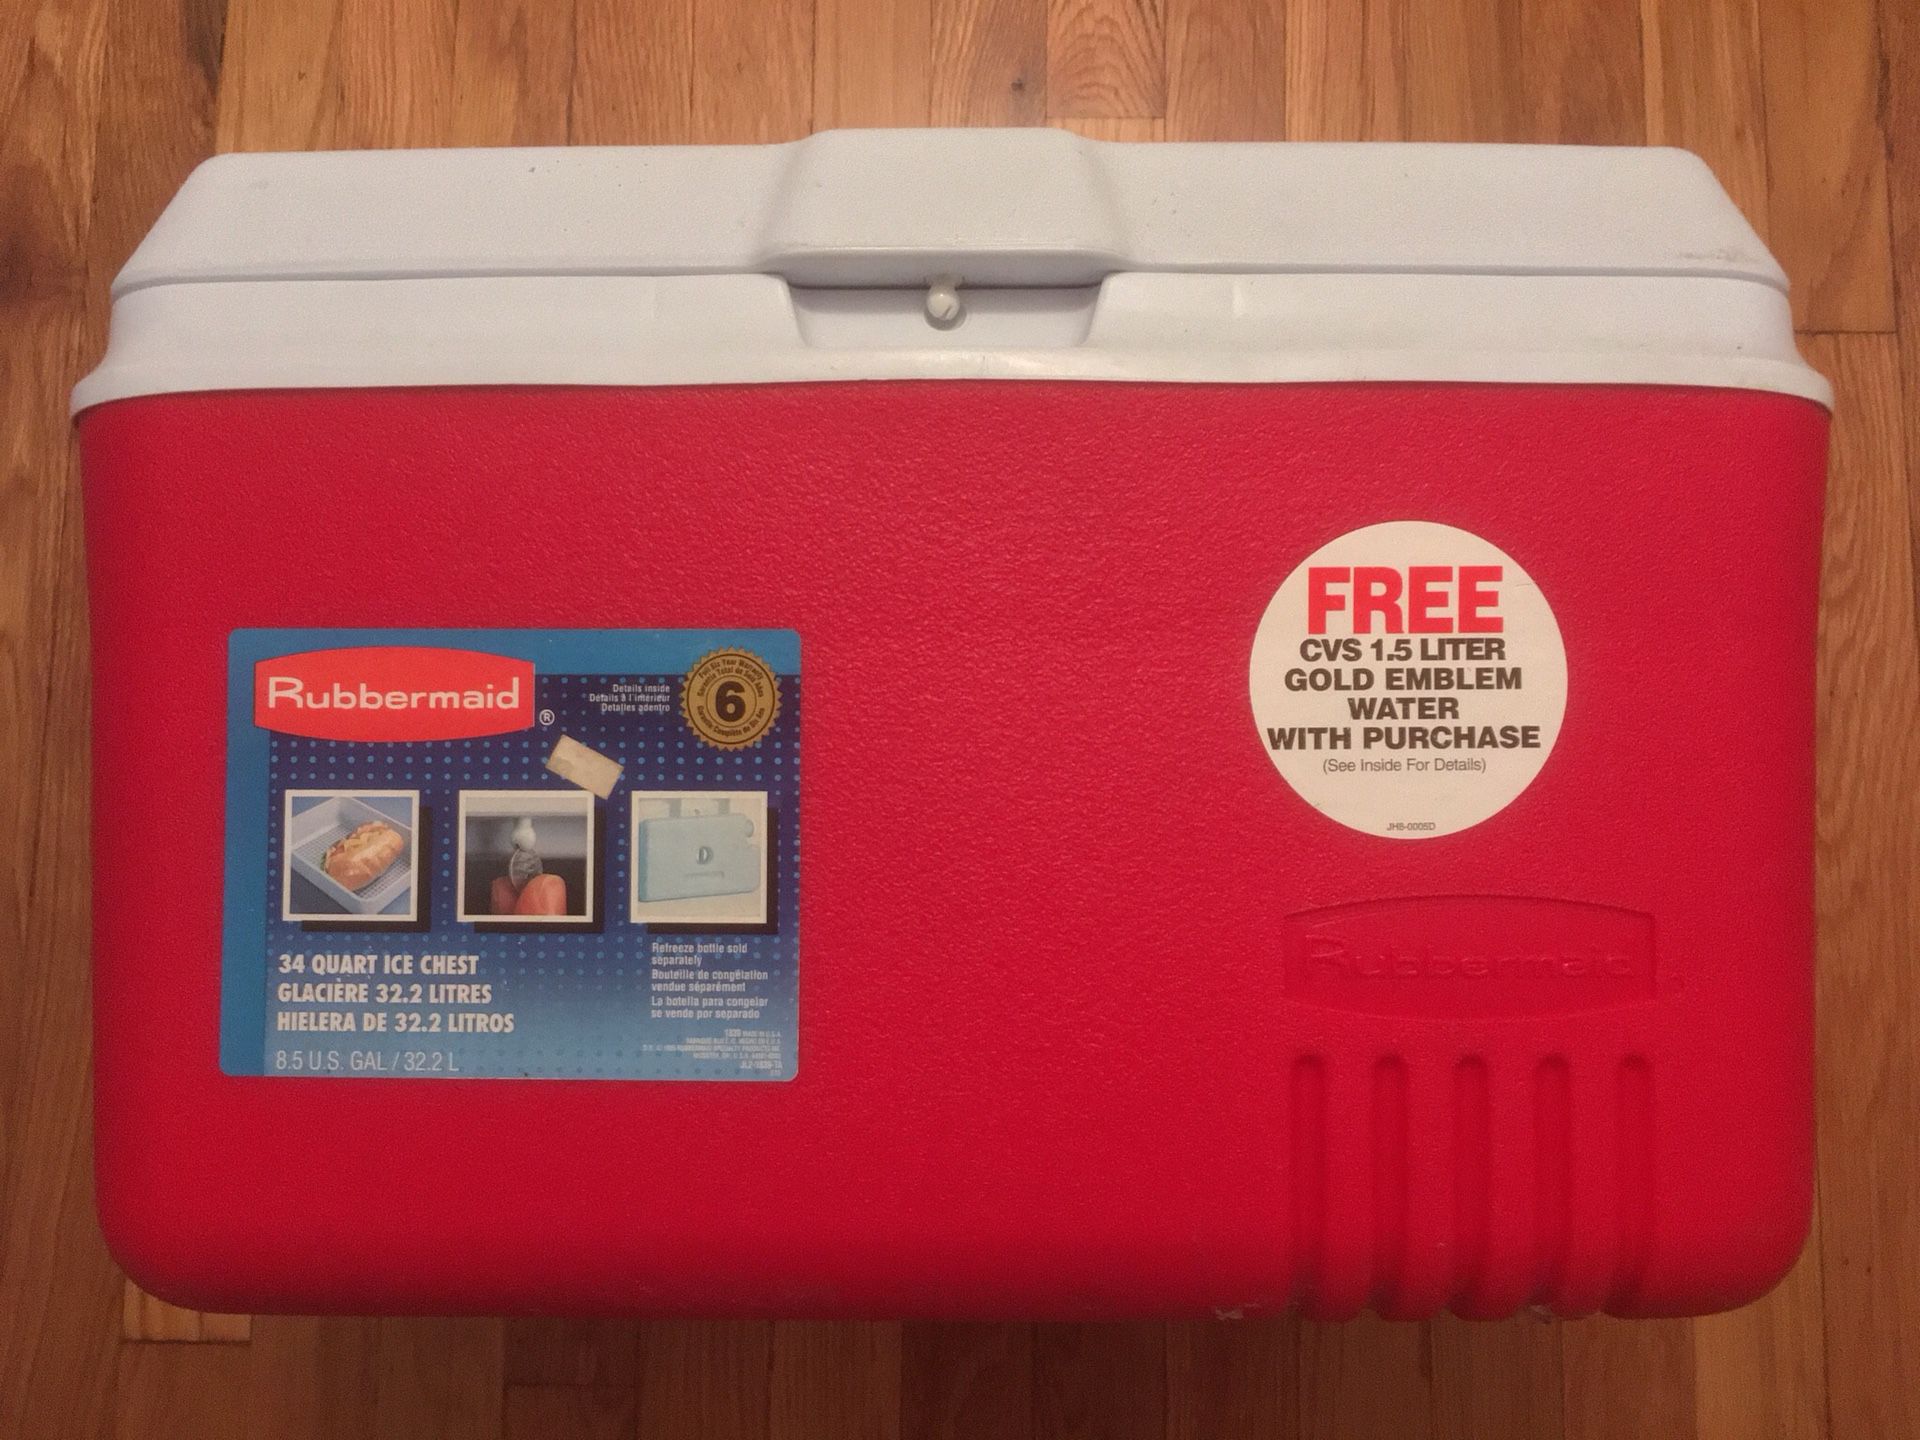 XL Extra Large Rubbermaid Red Icebox Ice Box Lunch Beverage Cooler Chest 34 Quart 8.5 Gallon 32.2 Liter